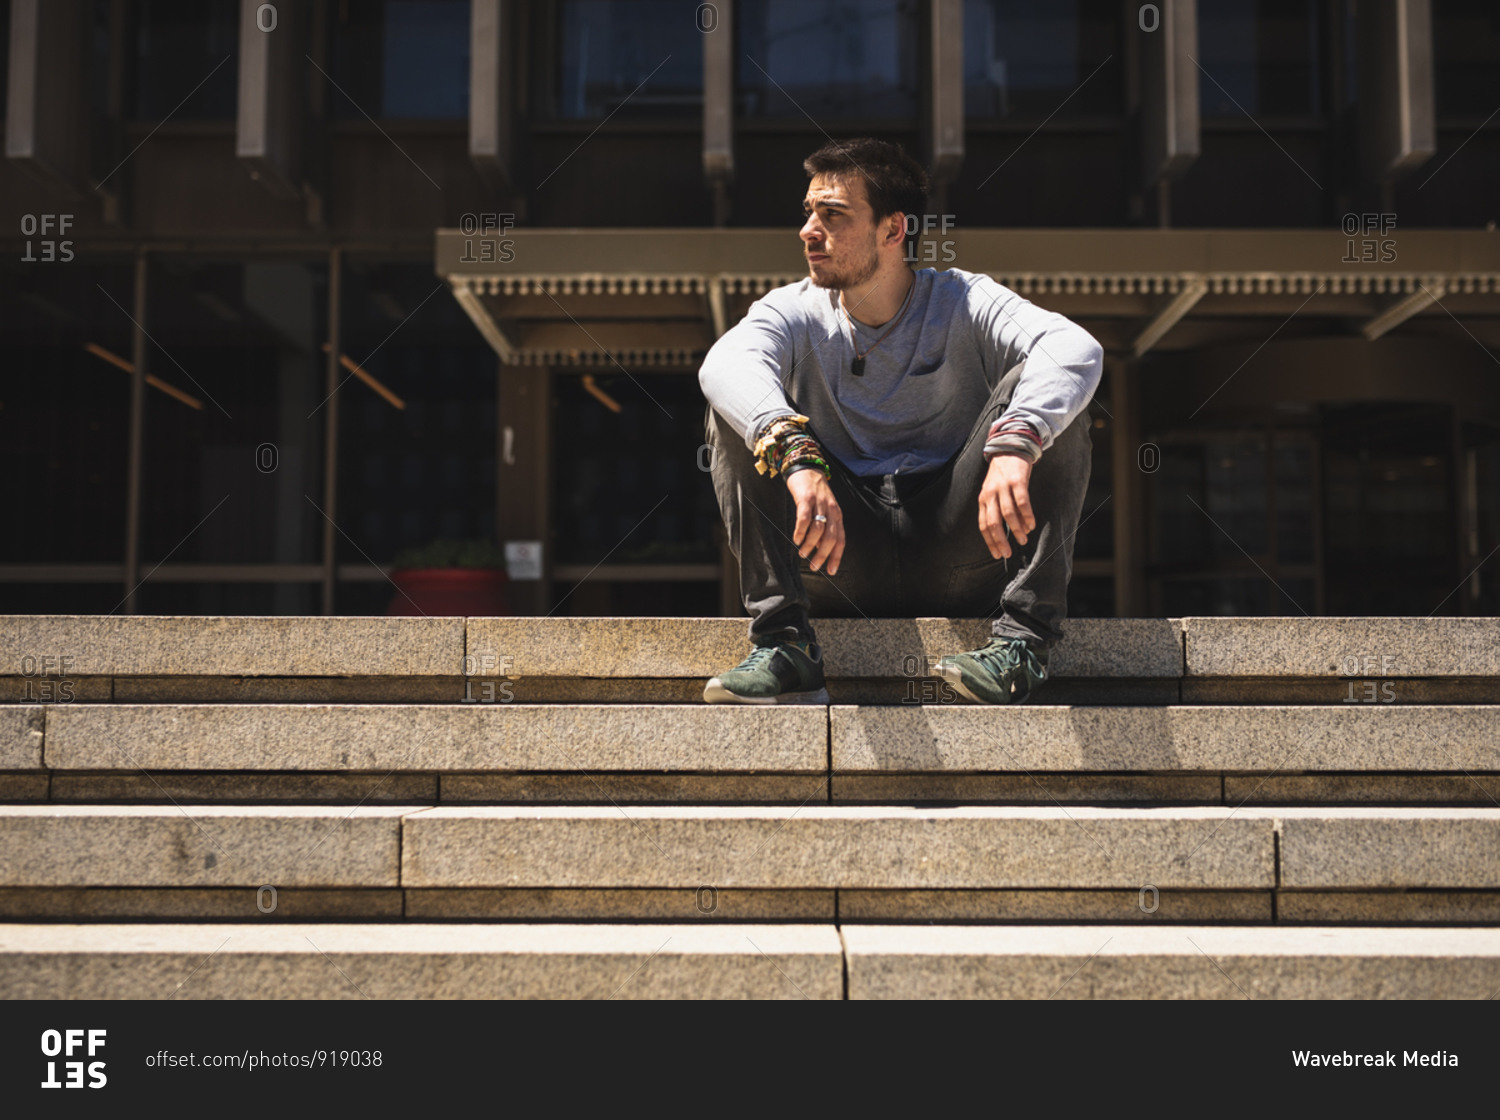 Front view of a Caucasian man practicing parkour by the building in a city on a sunny day, resting taking a break, sitting on the stairs.